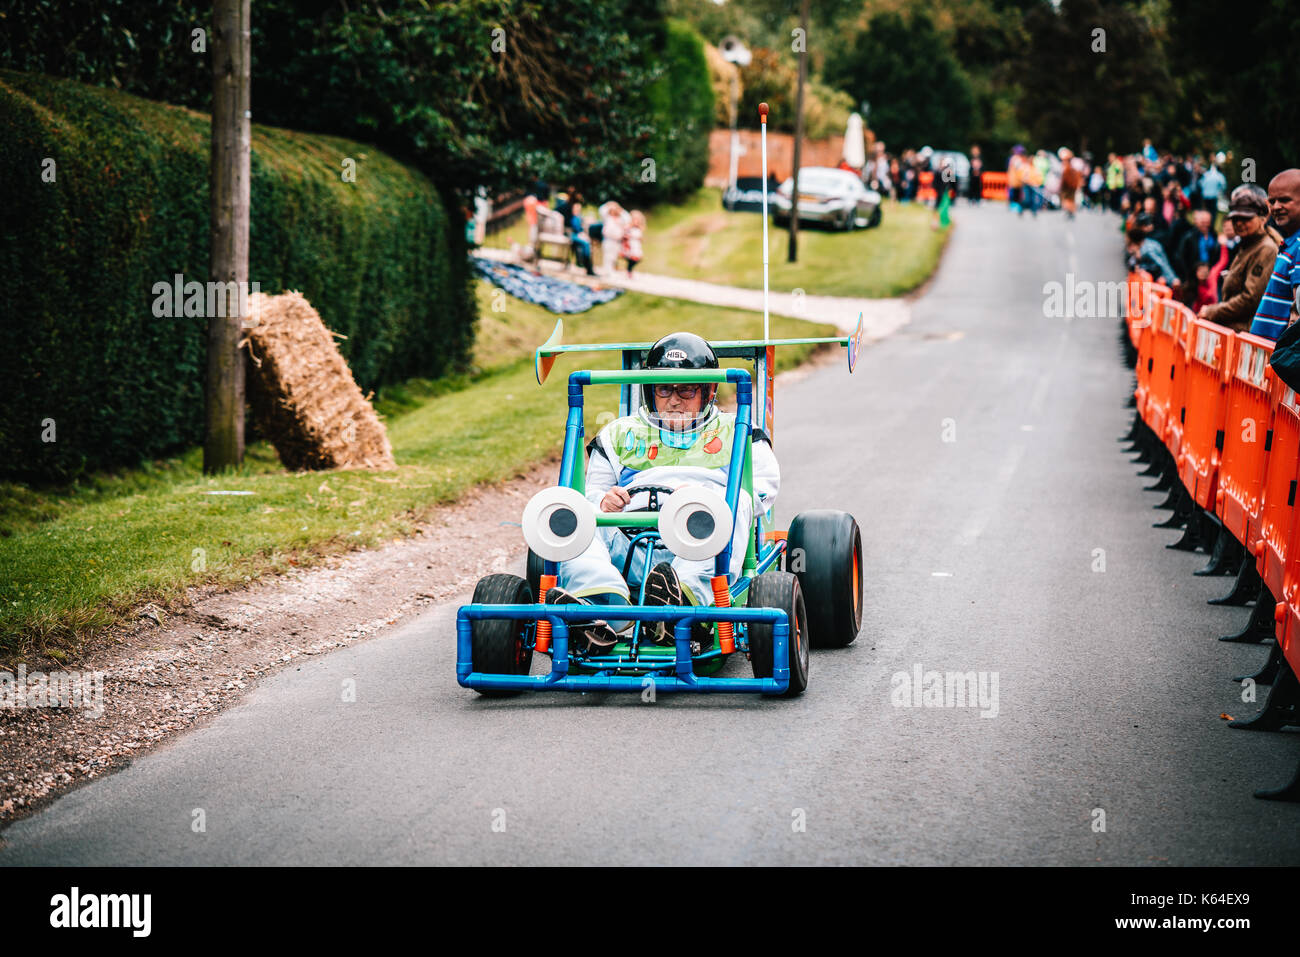 Cookham, UK. 10th Sep, 2017. Participant in the 11th Gravity Grand Prix which took place in Cookham, Berkshire, United Kingdom on the 10th September 2017. Funds raised from the charity karting event went to the Thames Valley Air Ambulance. Credit: Worsfold/Alamy Live News Stock Photo